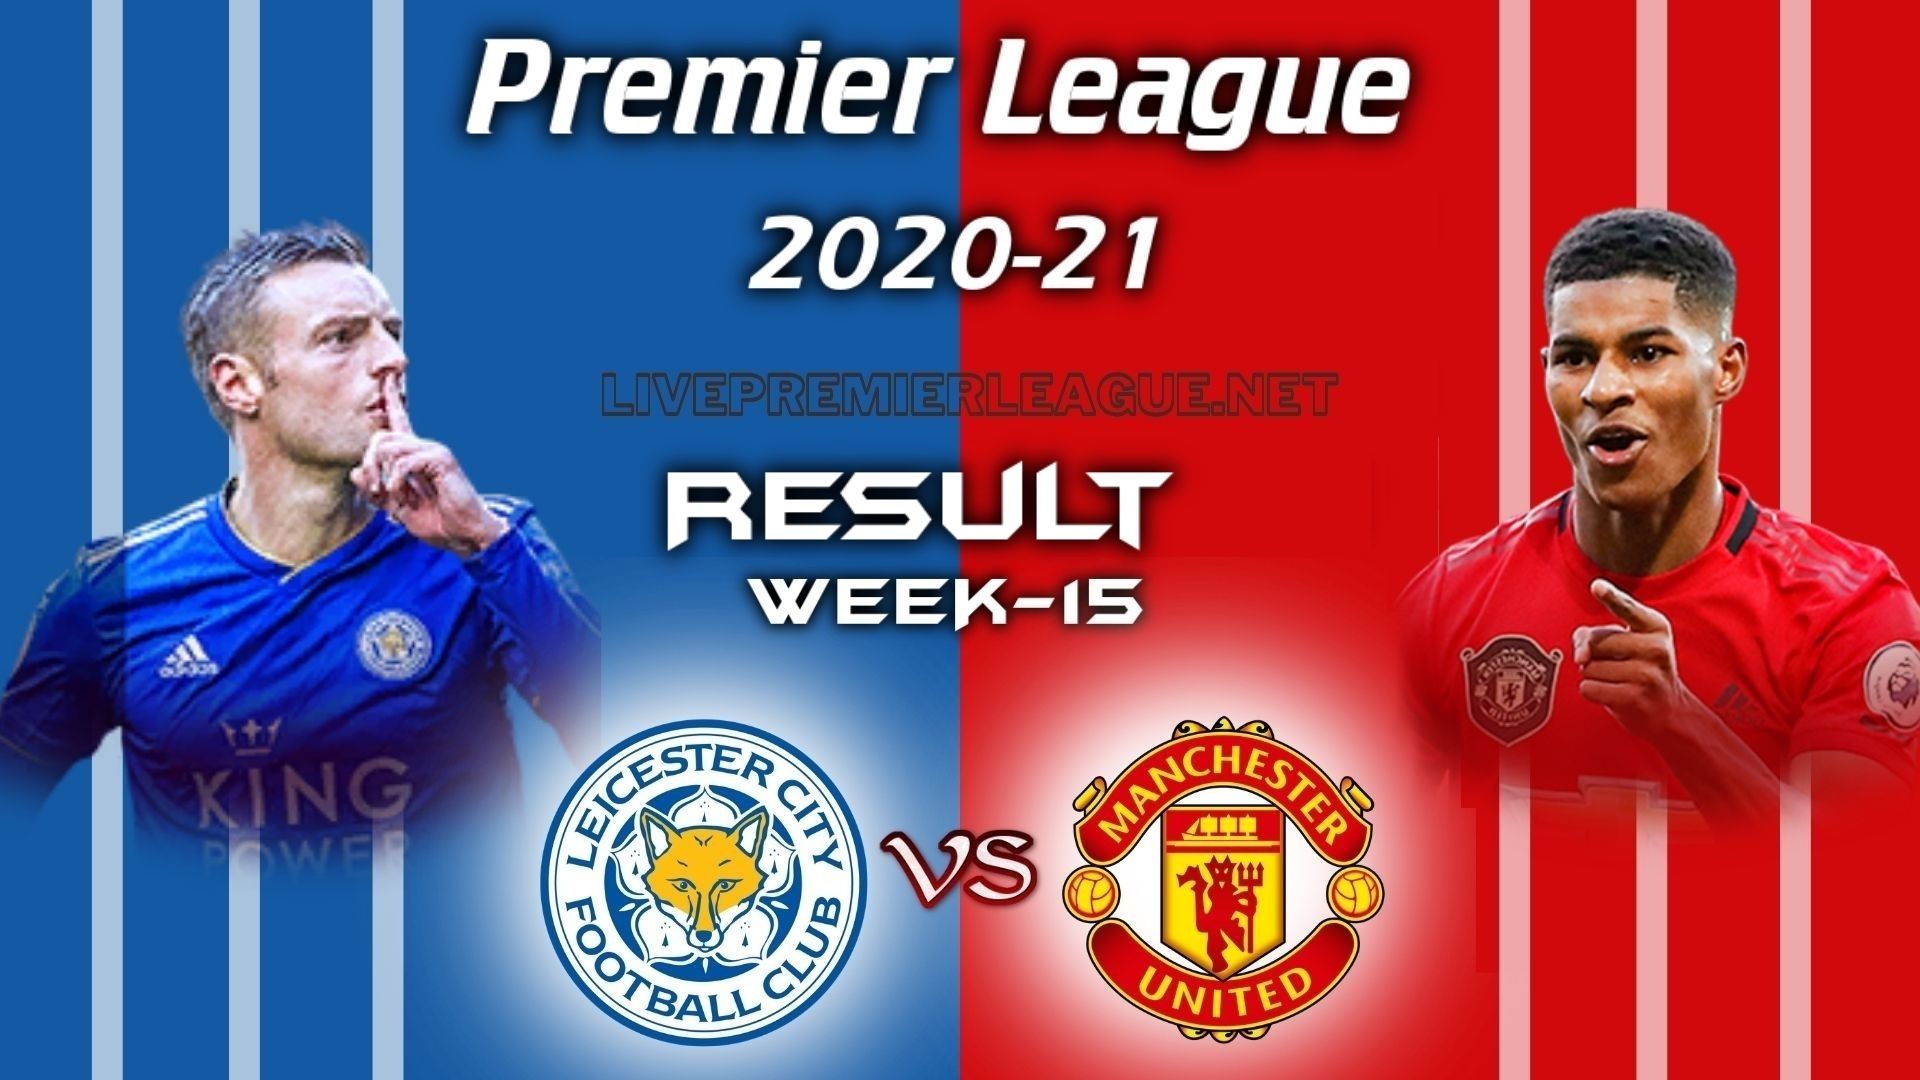 Leicester City Vs Manchester United | EPL Week 15 Result 2020